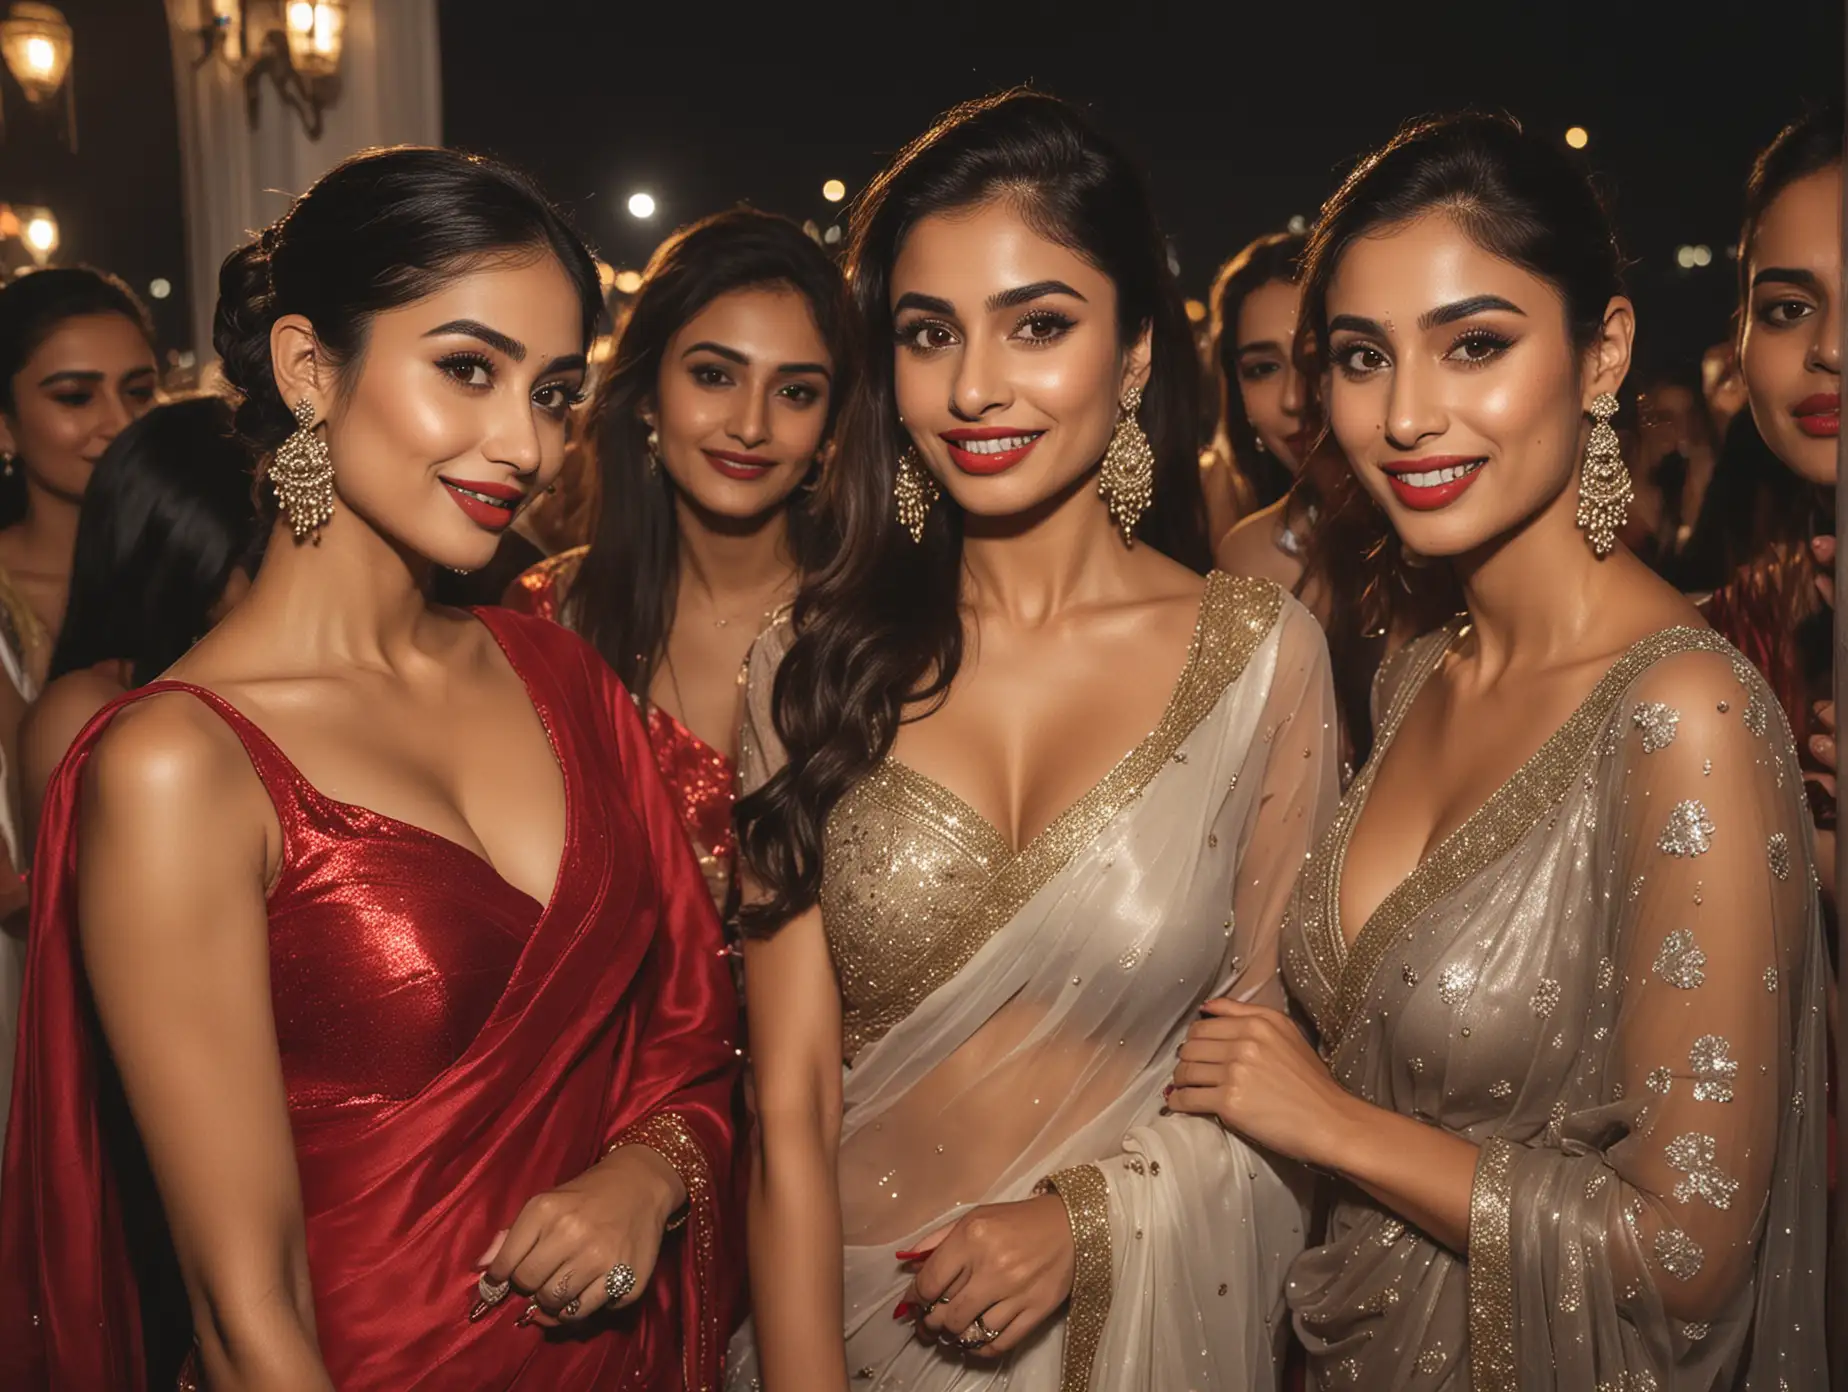 Flash photography, ISO-100 f/32 Hasselblad camera shot. VIP area of a posh Dubai nightblub. Decadent party in progress. Mouni Roy & Disha Patani partying wearing a nothing but silk chiffon shiny sarees, red glossy lipstick & lots of makeup. Her bold slutty friends make out with her romantically